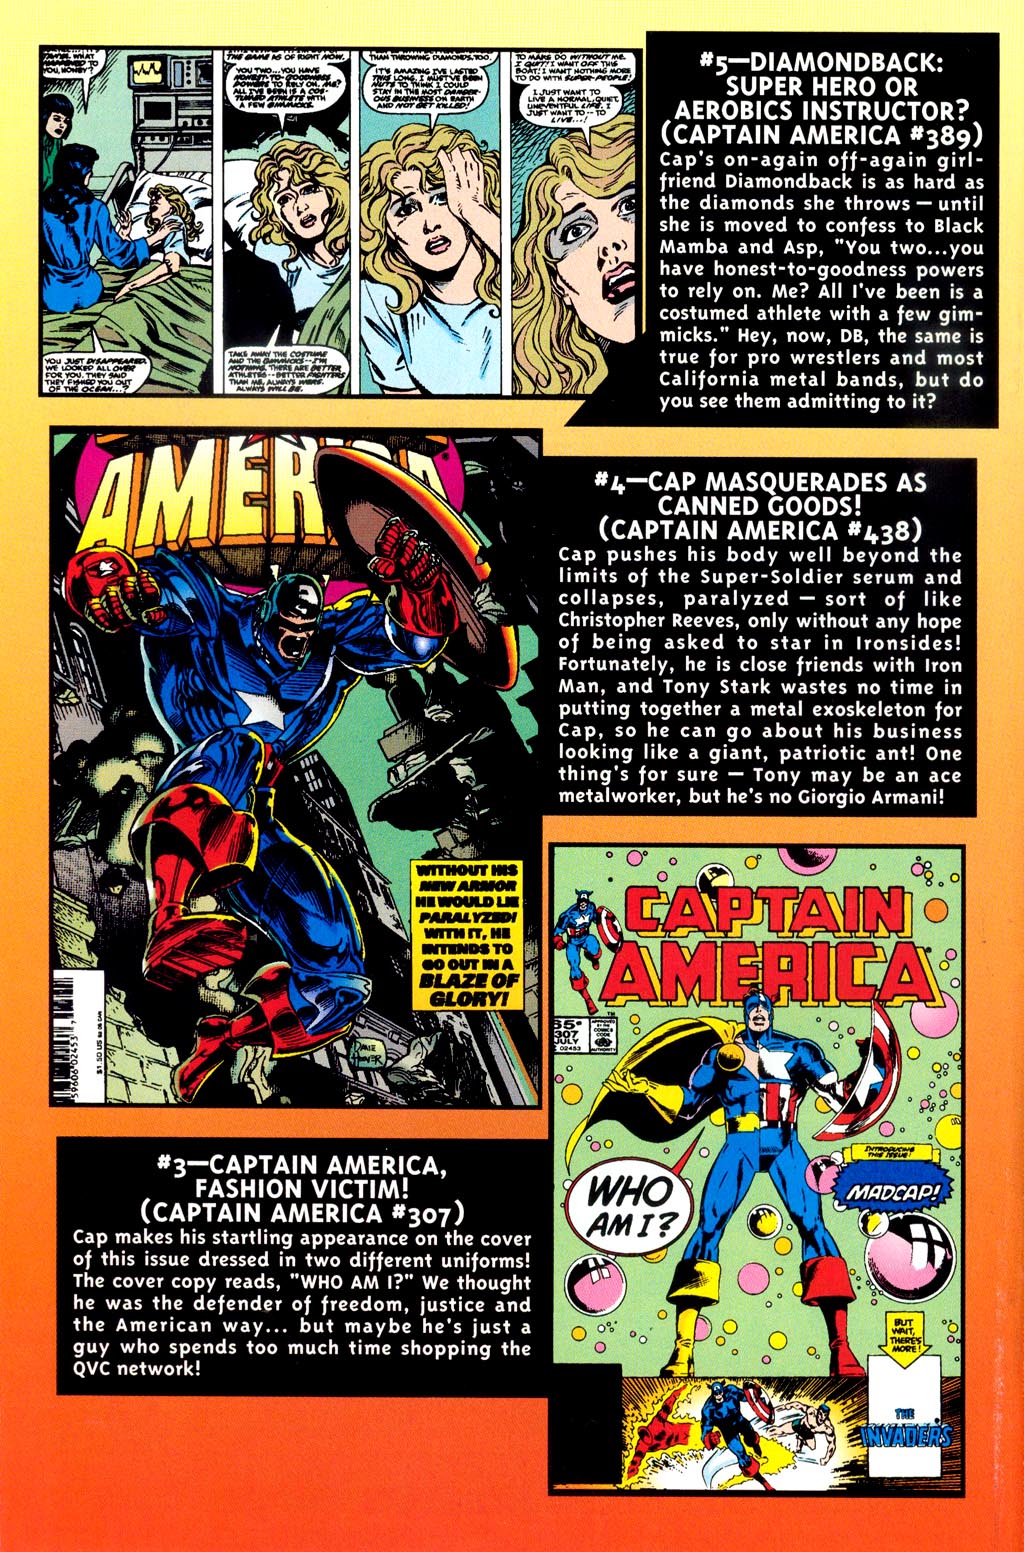 Captain America: The Legend Full Page 28